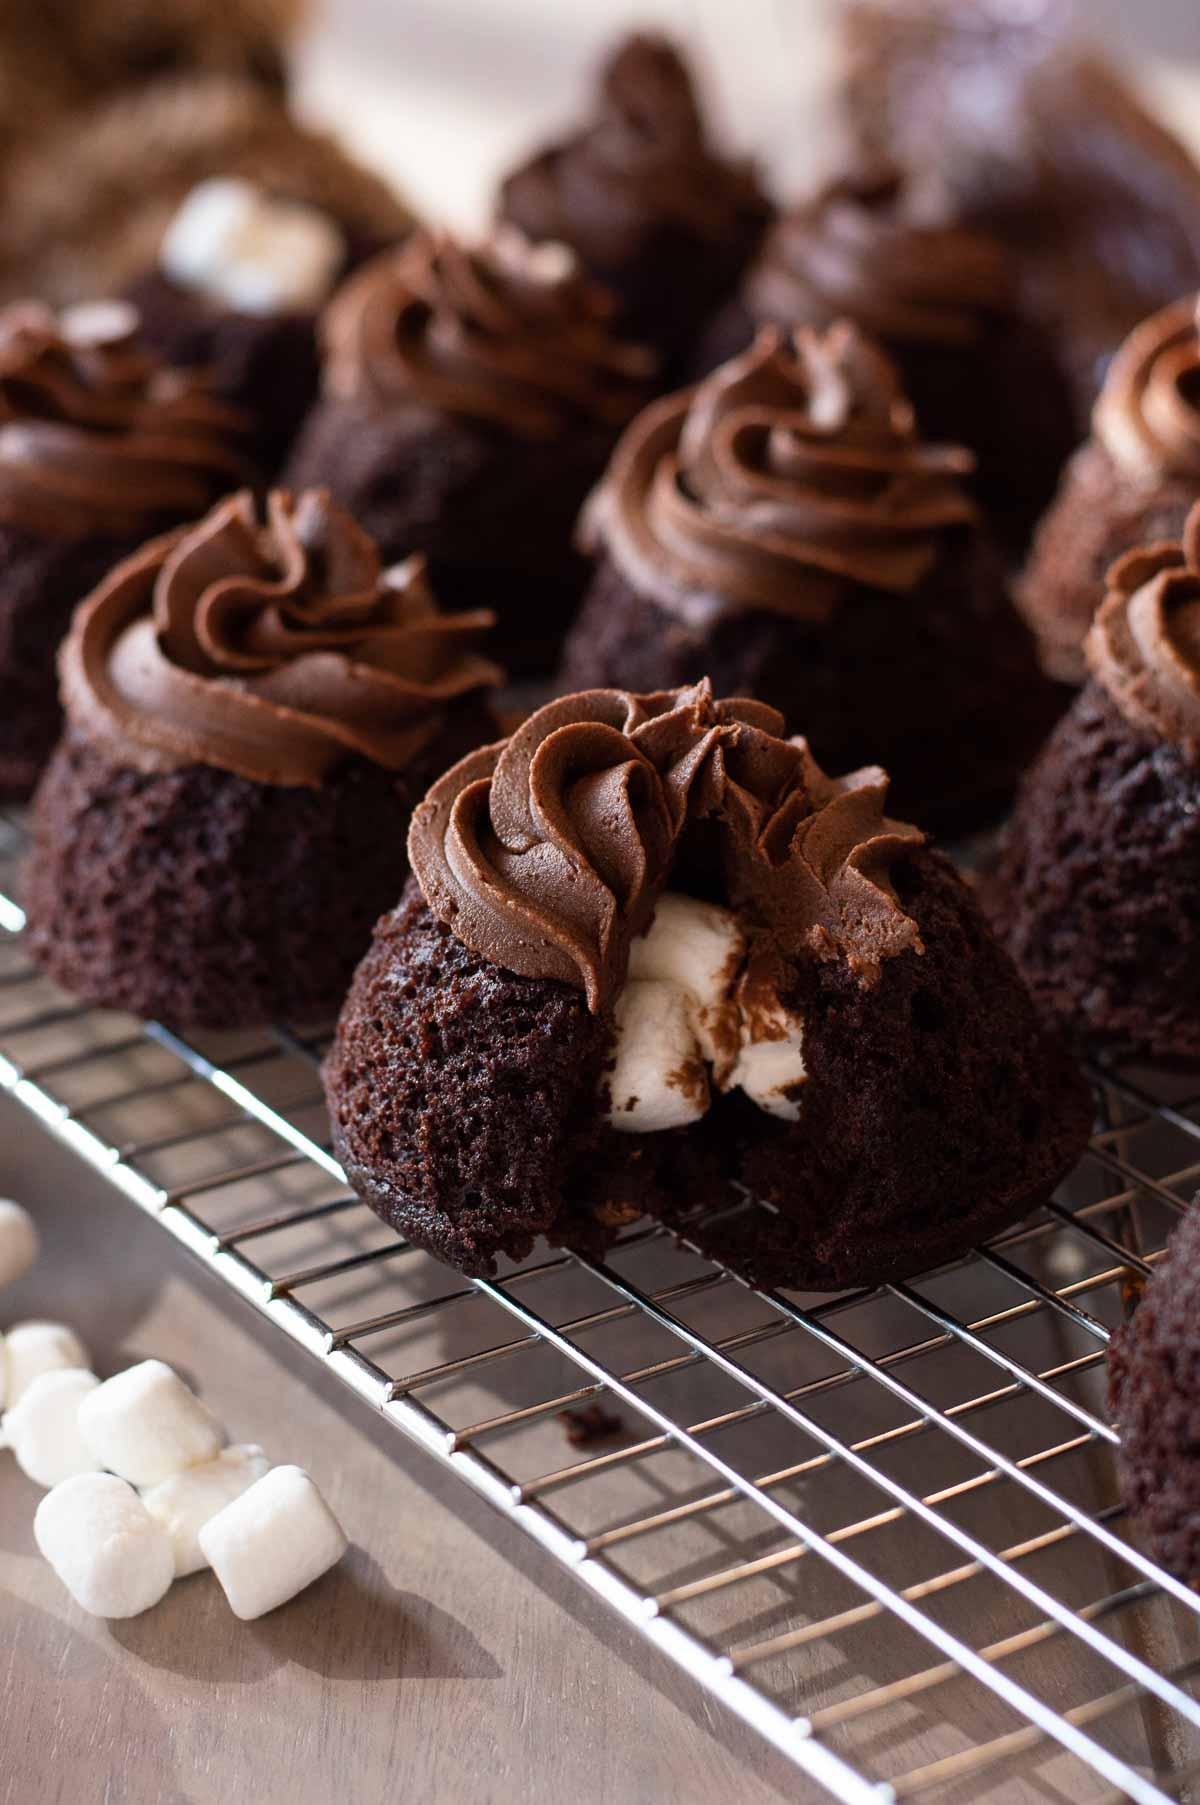 Groundhog Day Cupcakes with chocolate frosting and filled with marshmallows